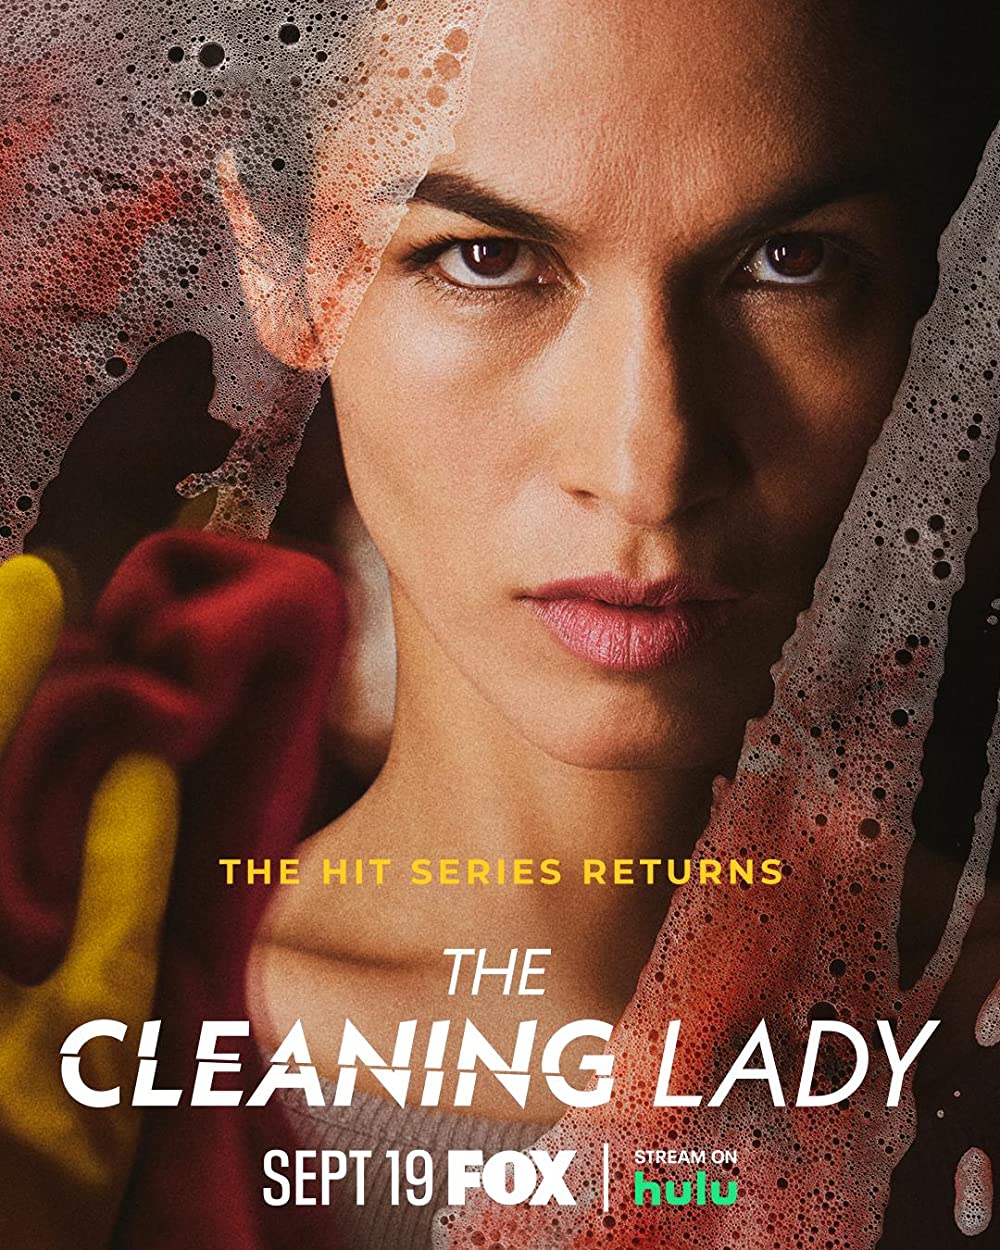 Cleaning Lady open casting call